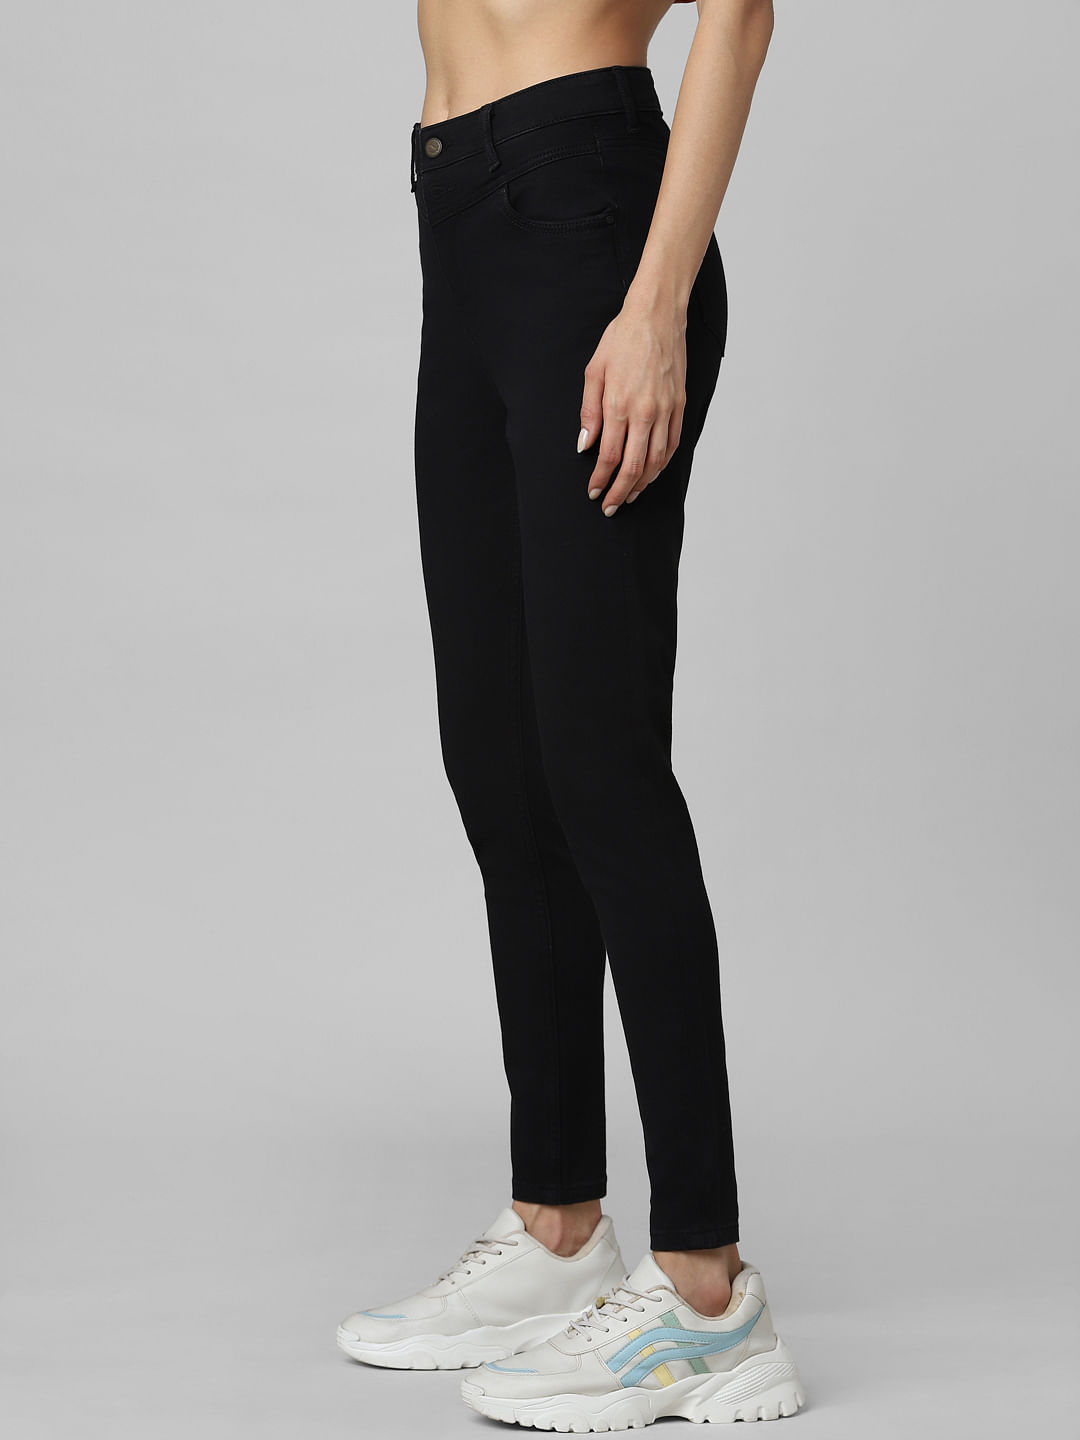 THE ROW Thilde Slit-Front Skinny Pants | Neiman Marcus